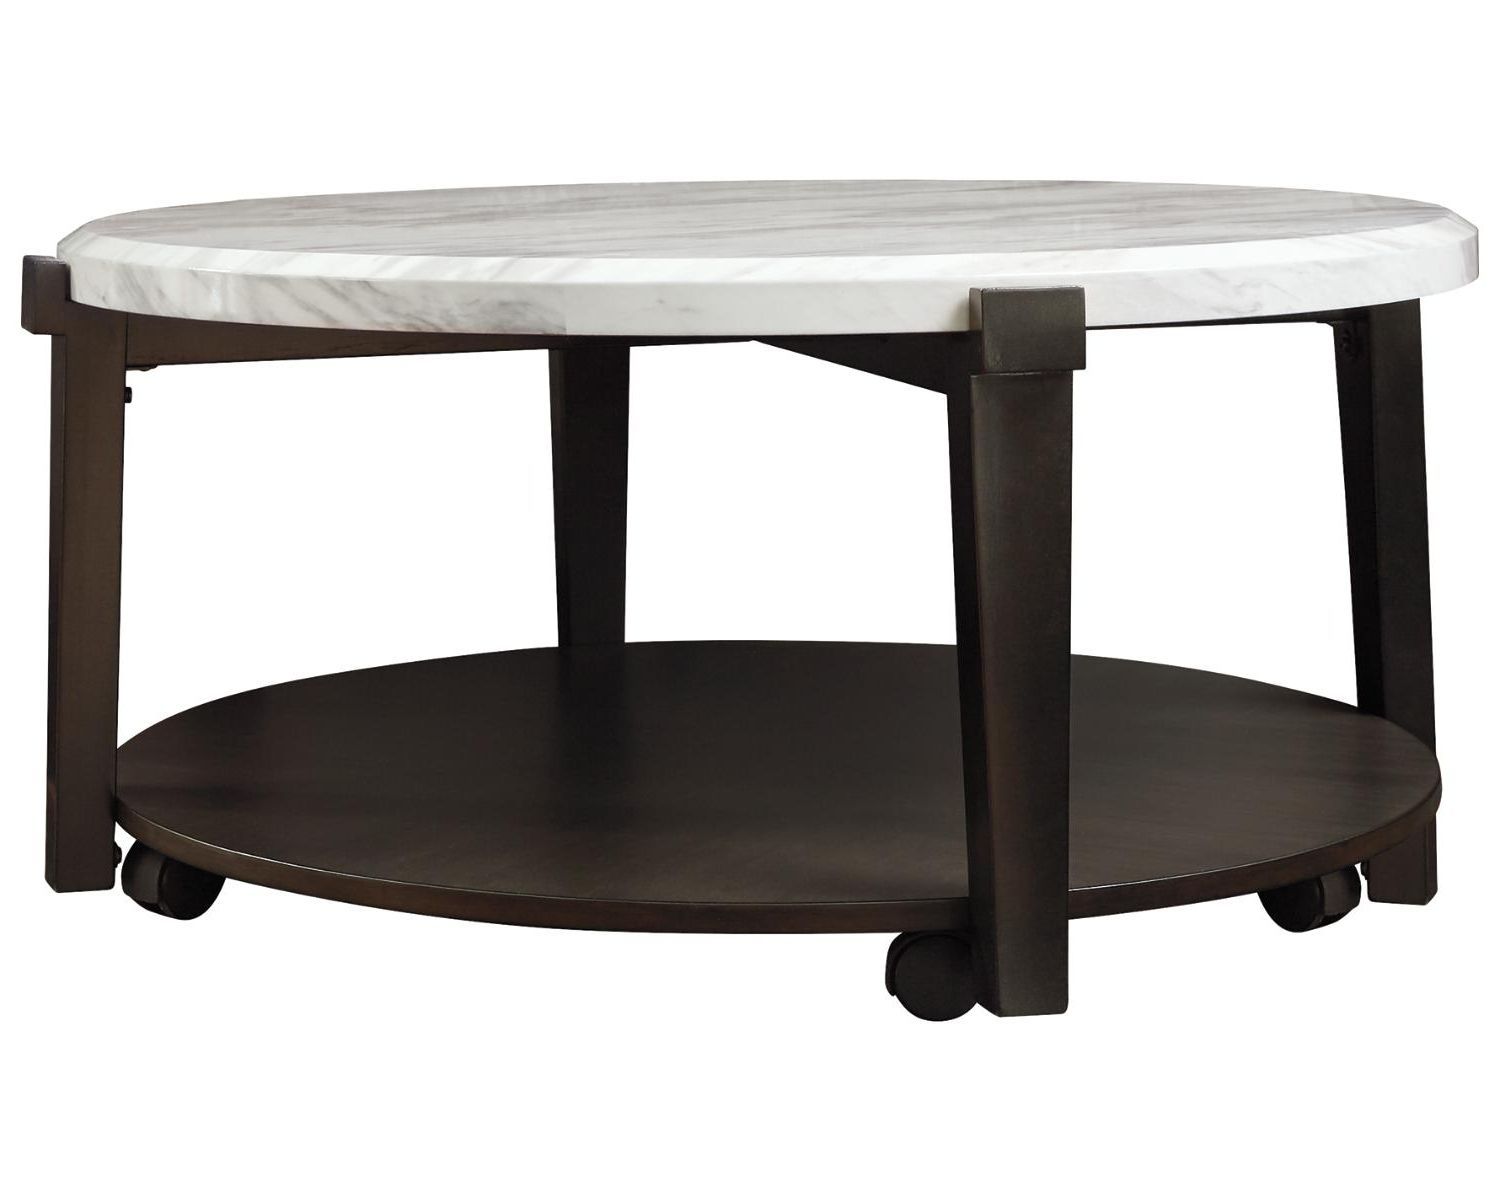 2019 Faux White Marble And Metal Coffee Tables In Signature Designashley Janilly Dark Brown Round (Gallery 10 of 20)